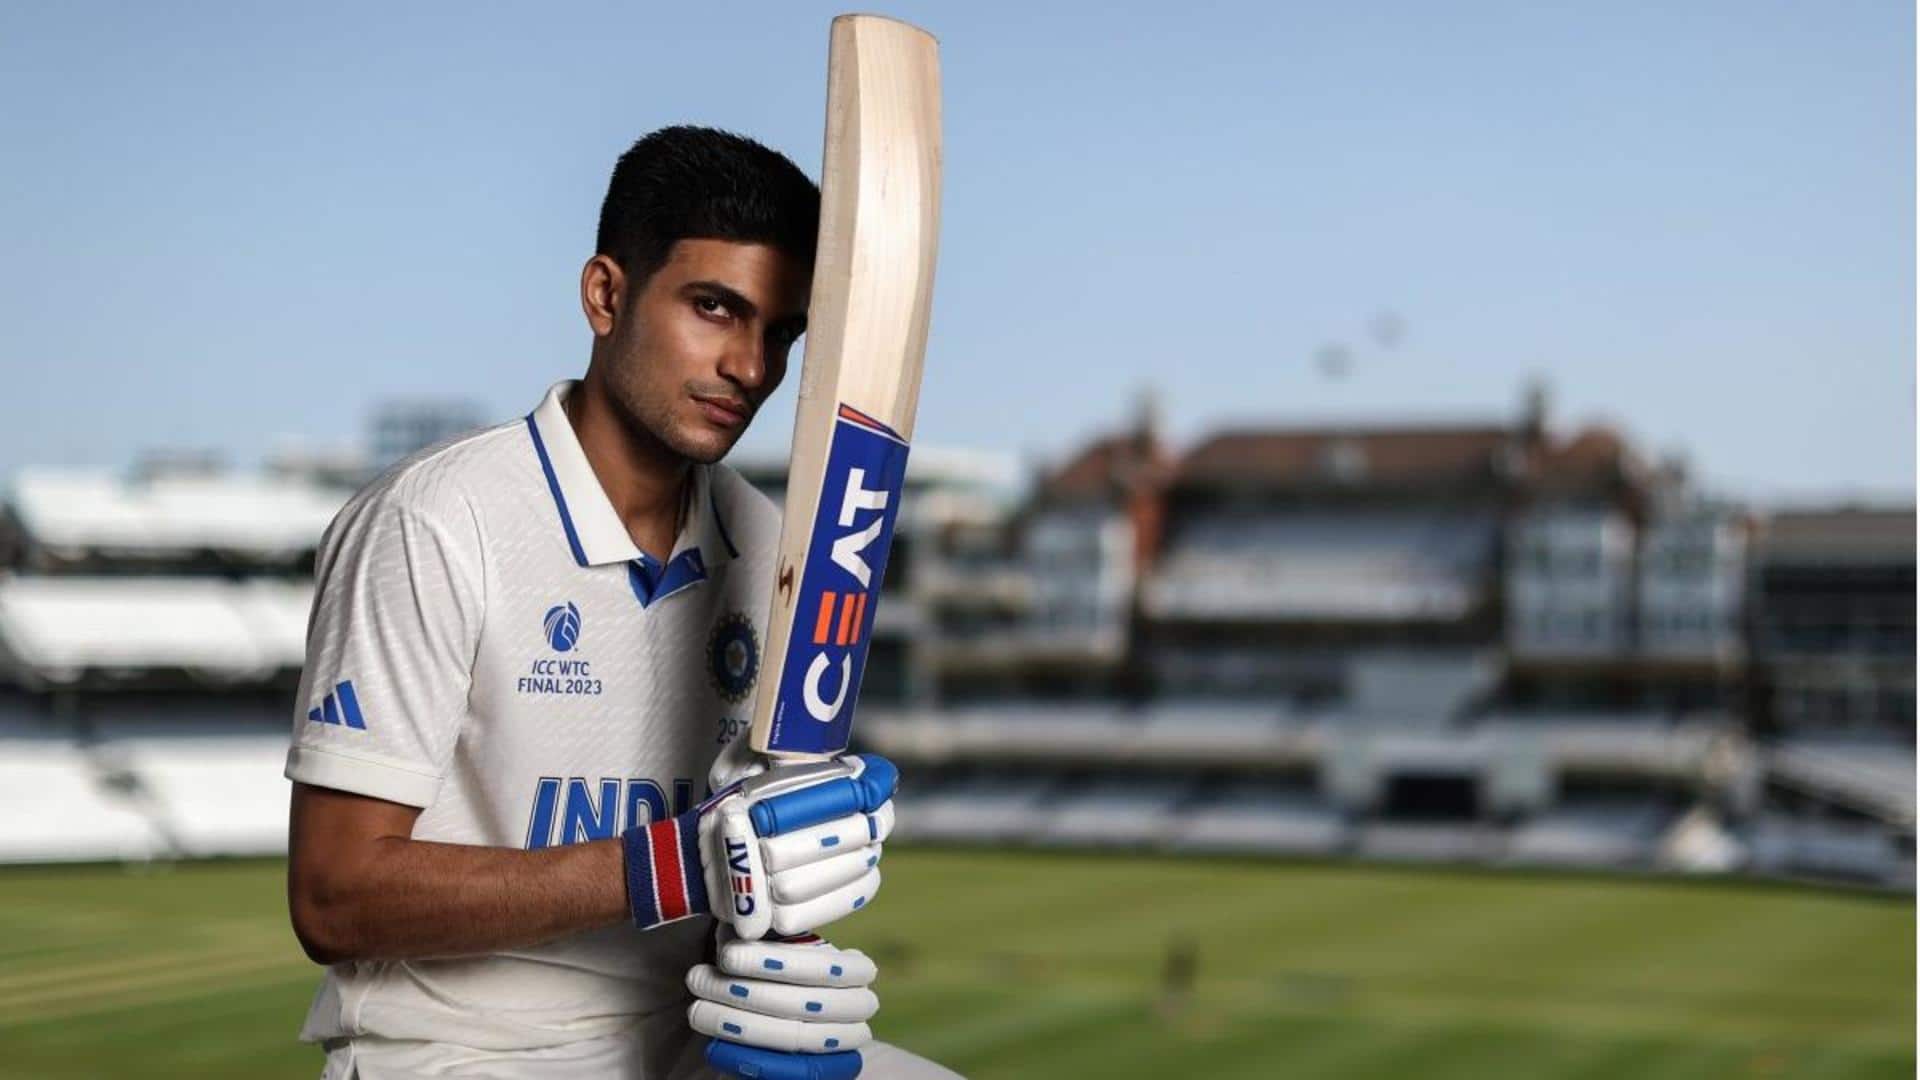 Shubman Gill fined for criticizing umpire's decision: Details here